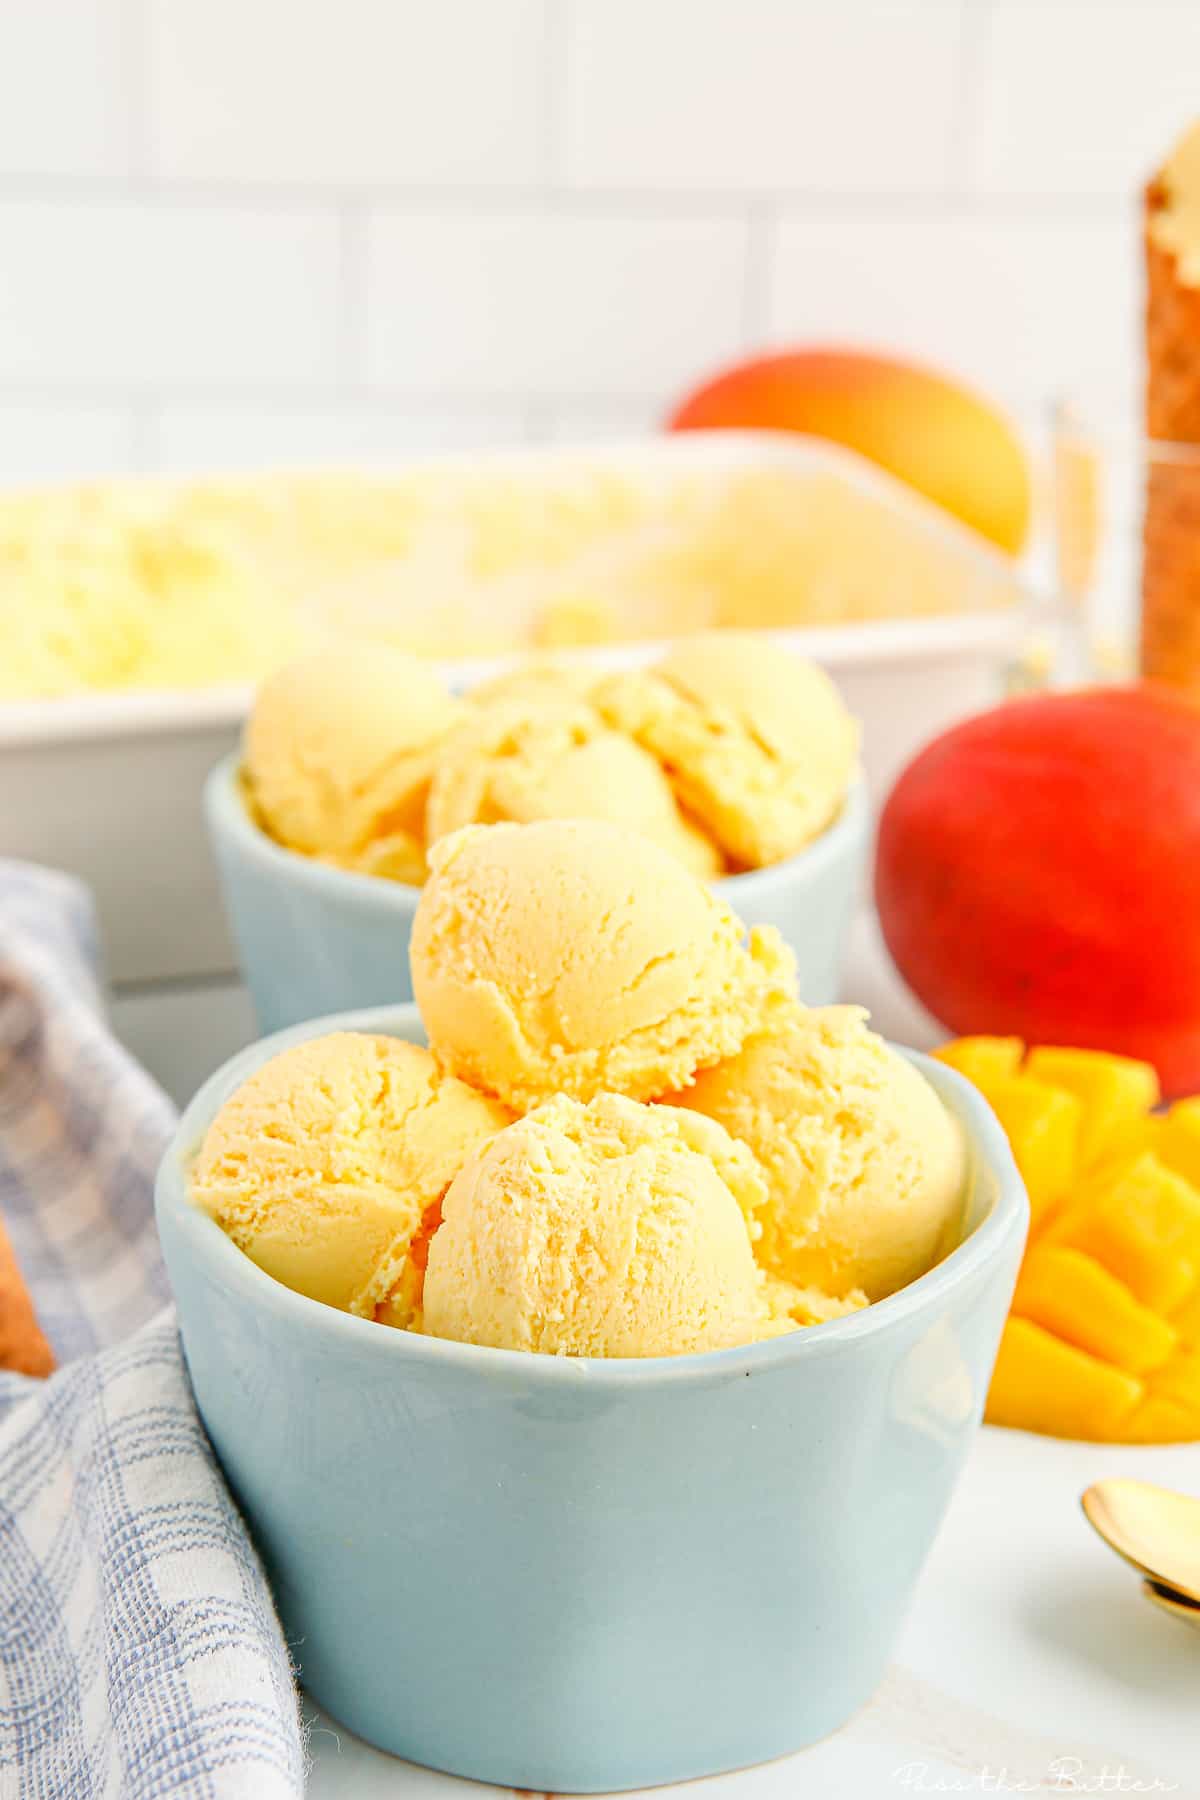 scoops of mango ice cream in a blue bowl